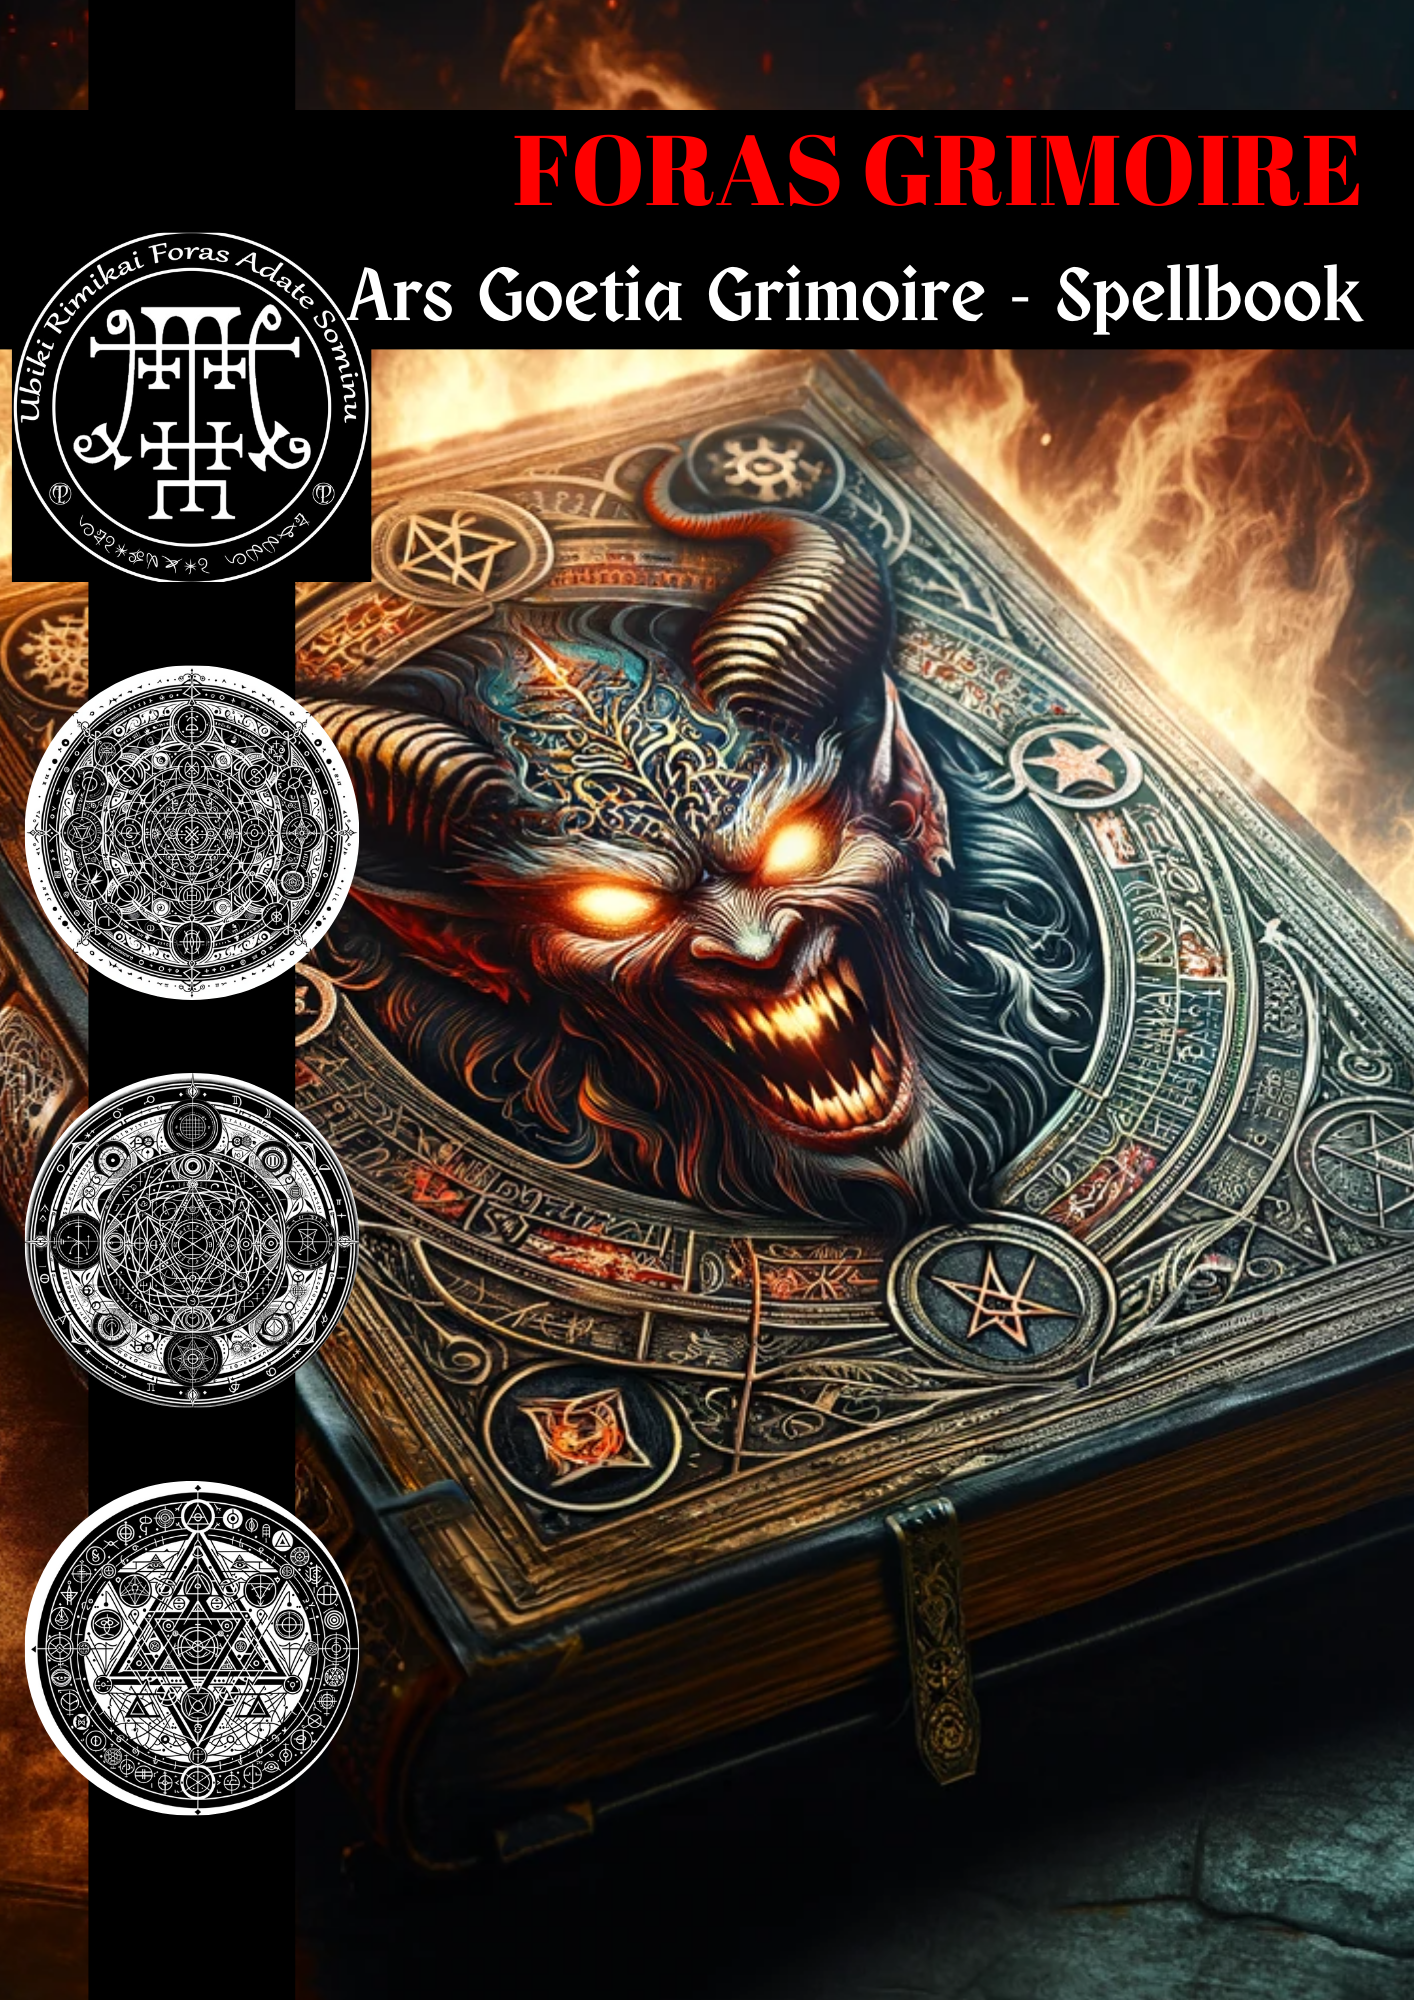 Grimoire of Foras Spells & Rituals for Magical Practice and Resolve Business Problems - Abraxas Amulets ® Magic ♾️ Talismans ♾️ Kohungahunga